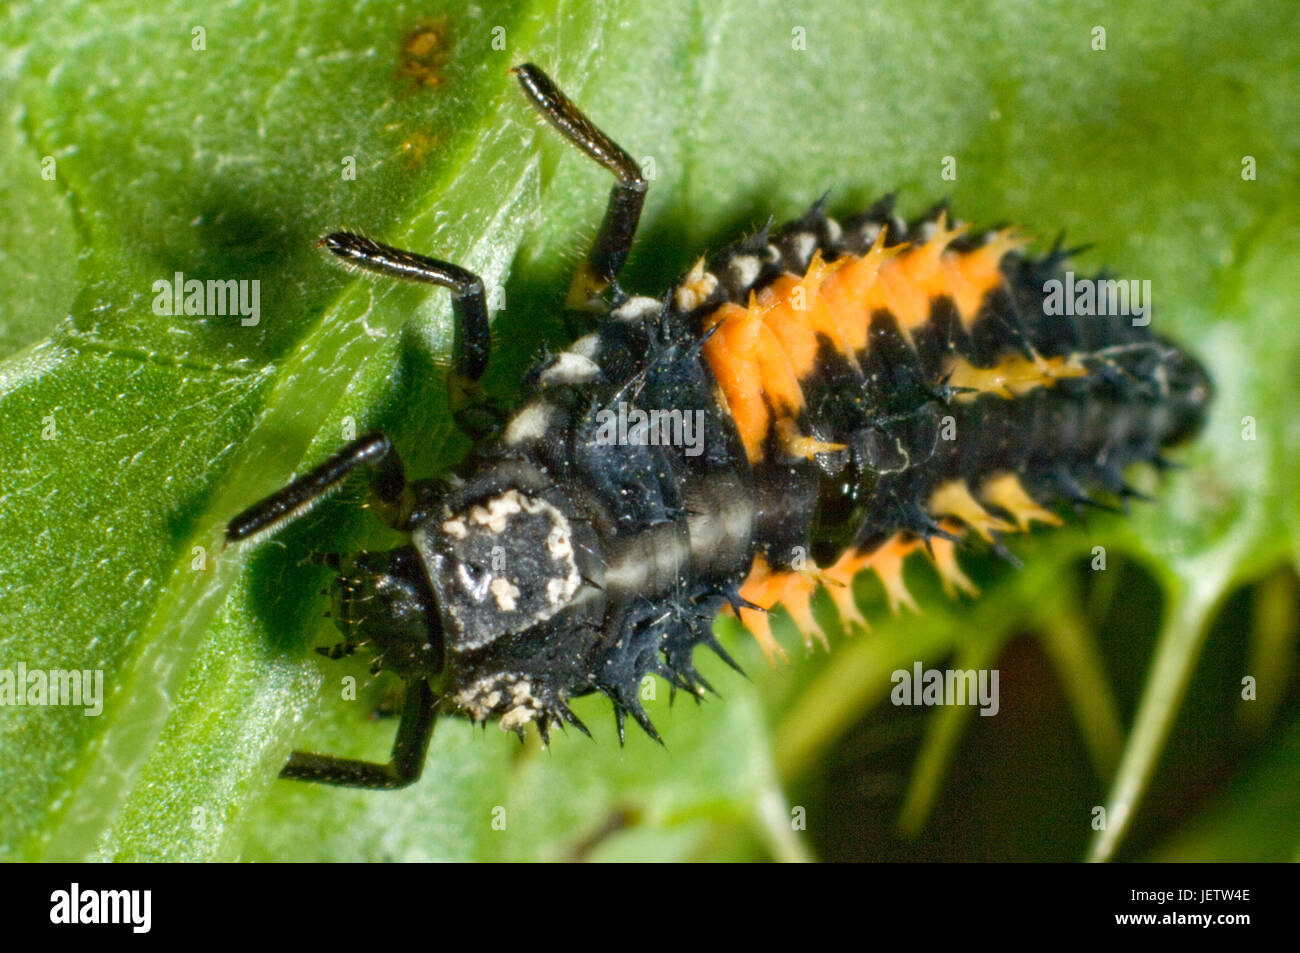 Photomicrograph of a harlequin or Asian ladybird, Harmonia axyridis, larva, predator of aphids and other small arthropods. Stock Photo